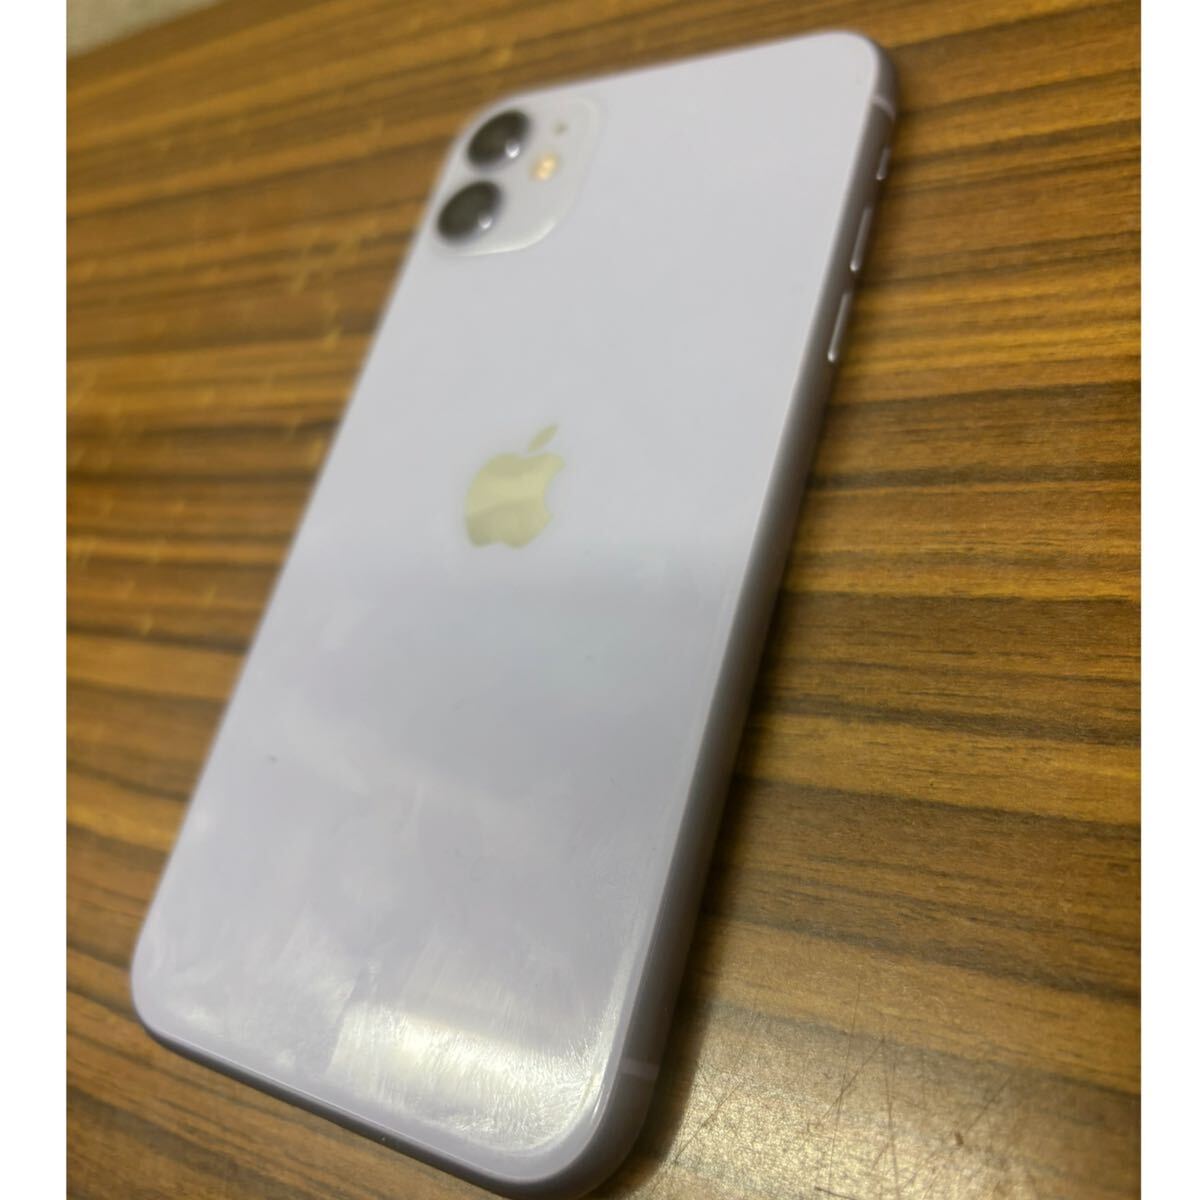  operation verification settled * iphone11 64GB * purple IMEI 352918116933539 SIM free * iPhone 11 64GB * extra charger 